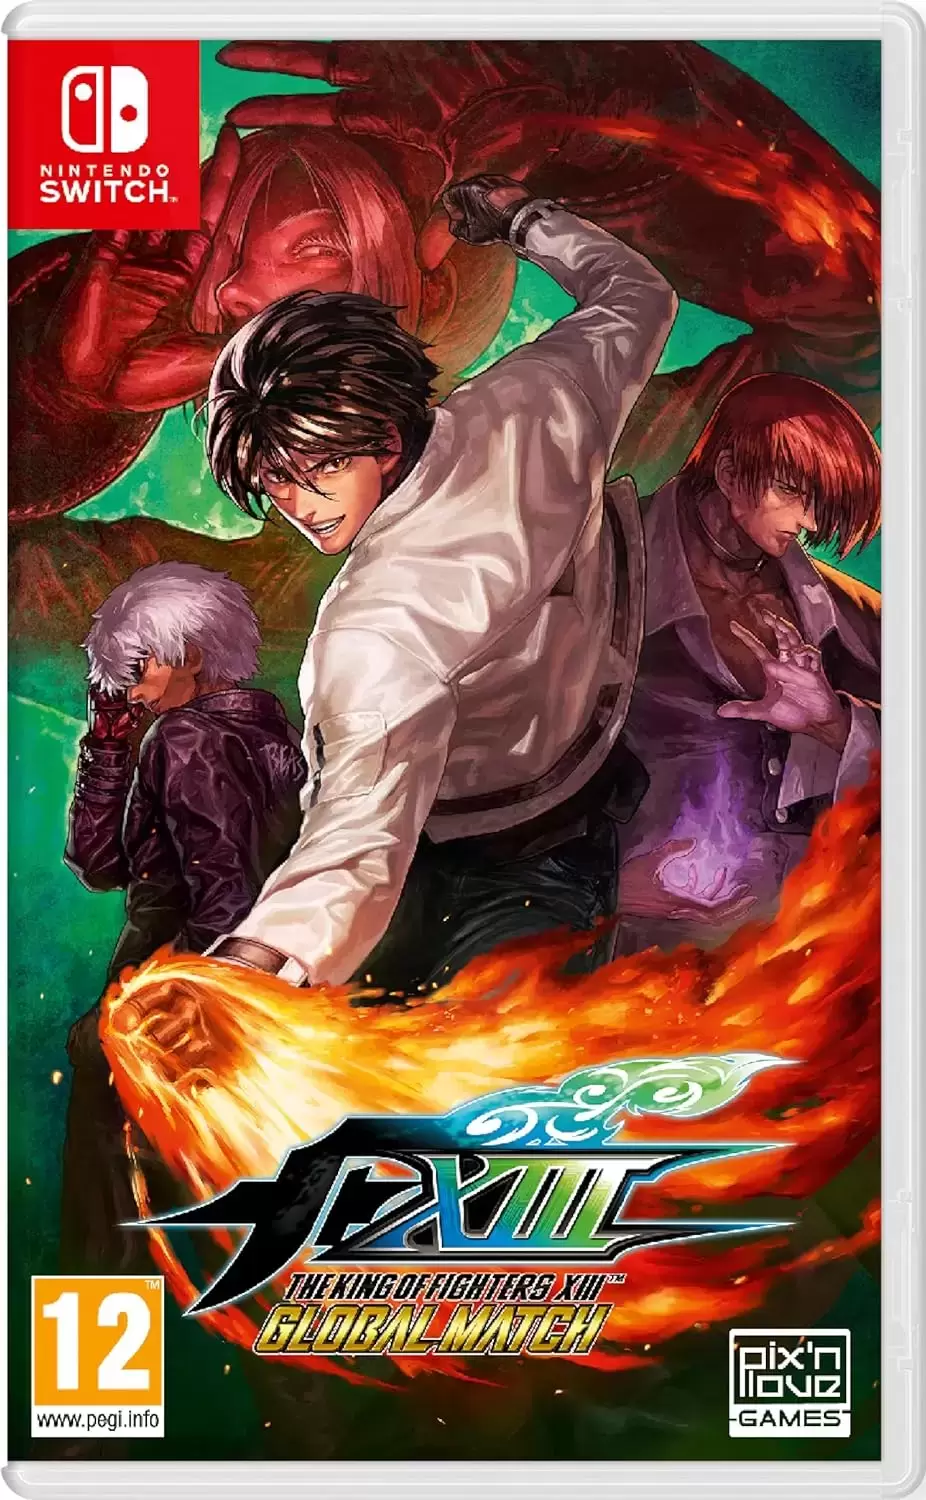 Nintendo Switch Games - The King Of Fighters XIII Global Match